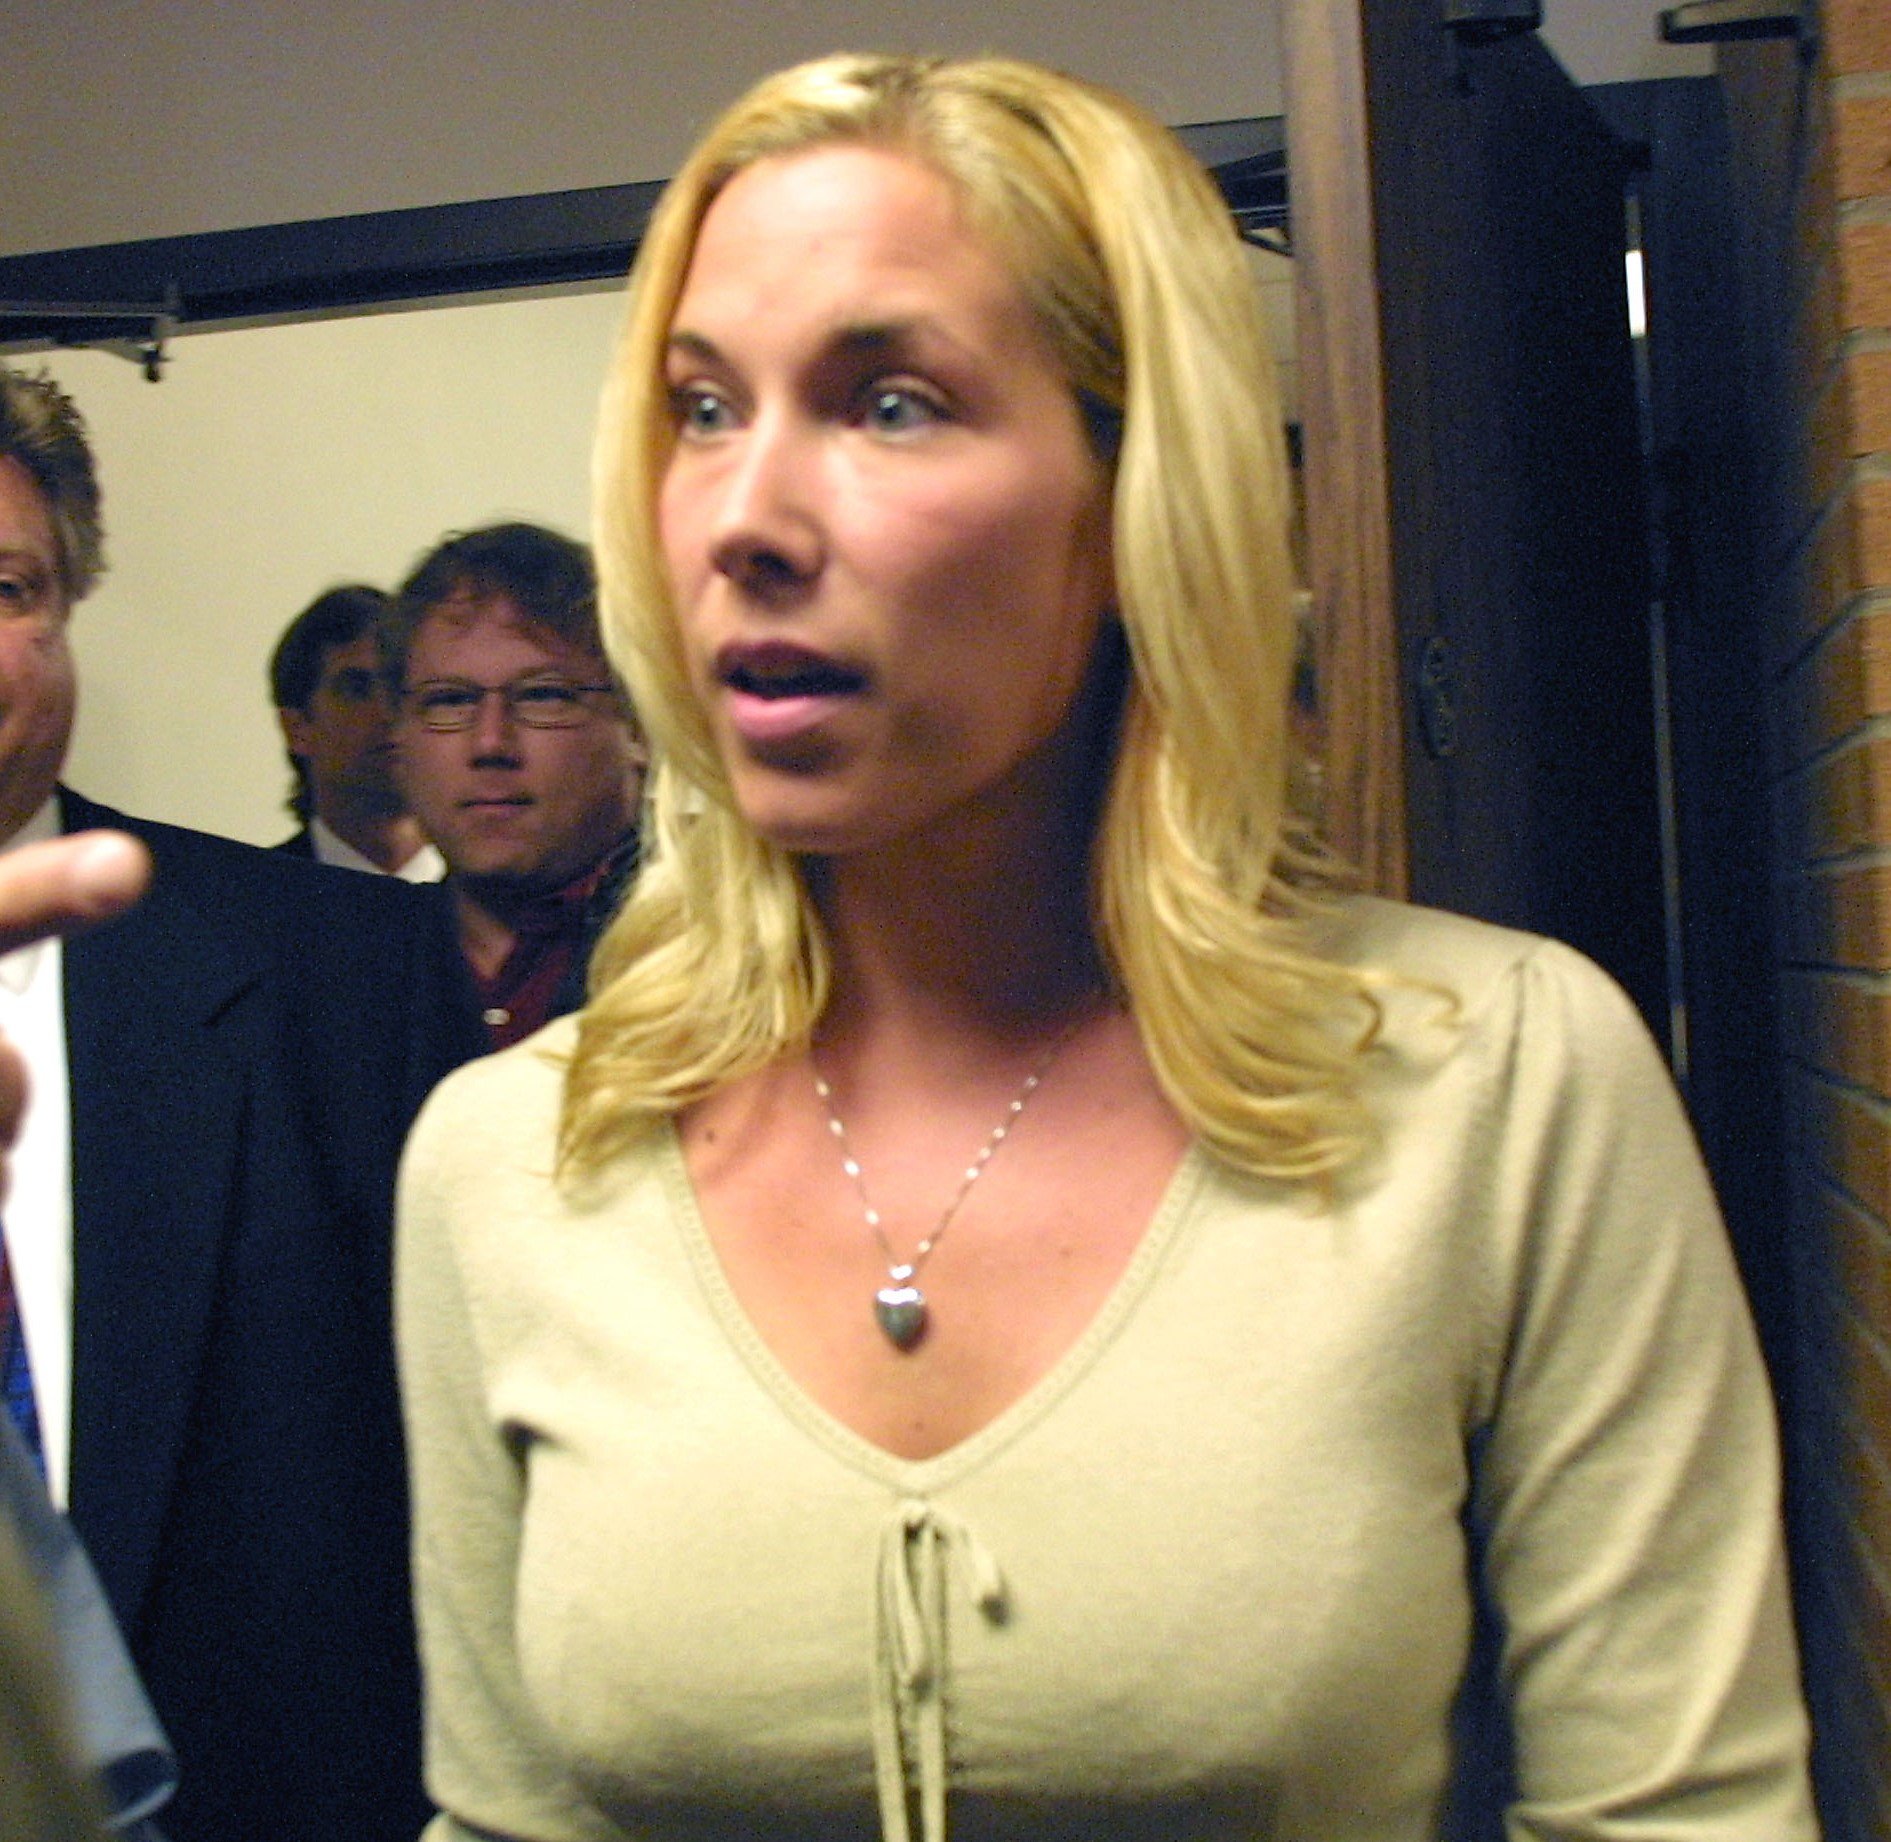 Eminem's ex-wife, Kimberly Scott, leaving a courtroom in Michigan